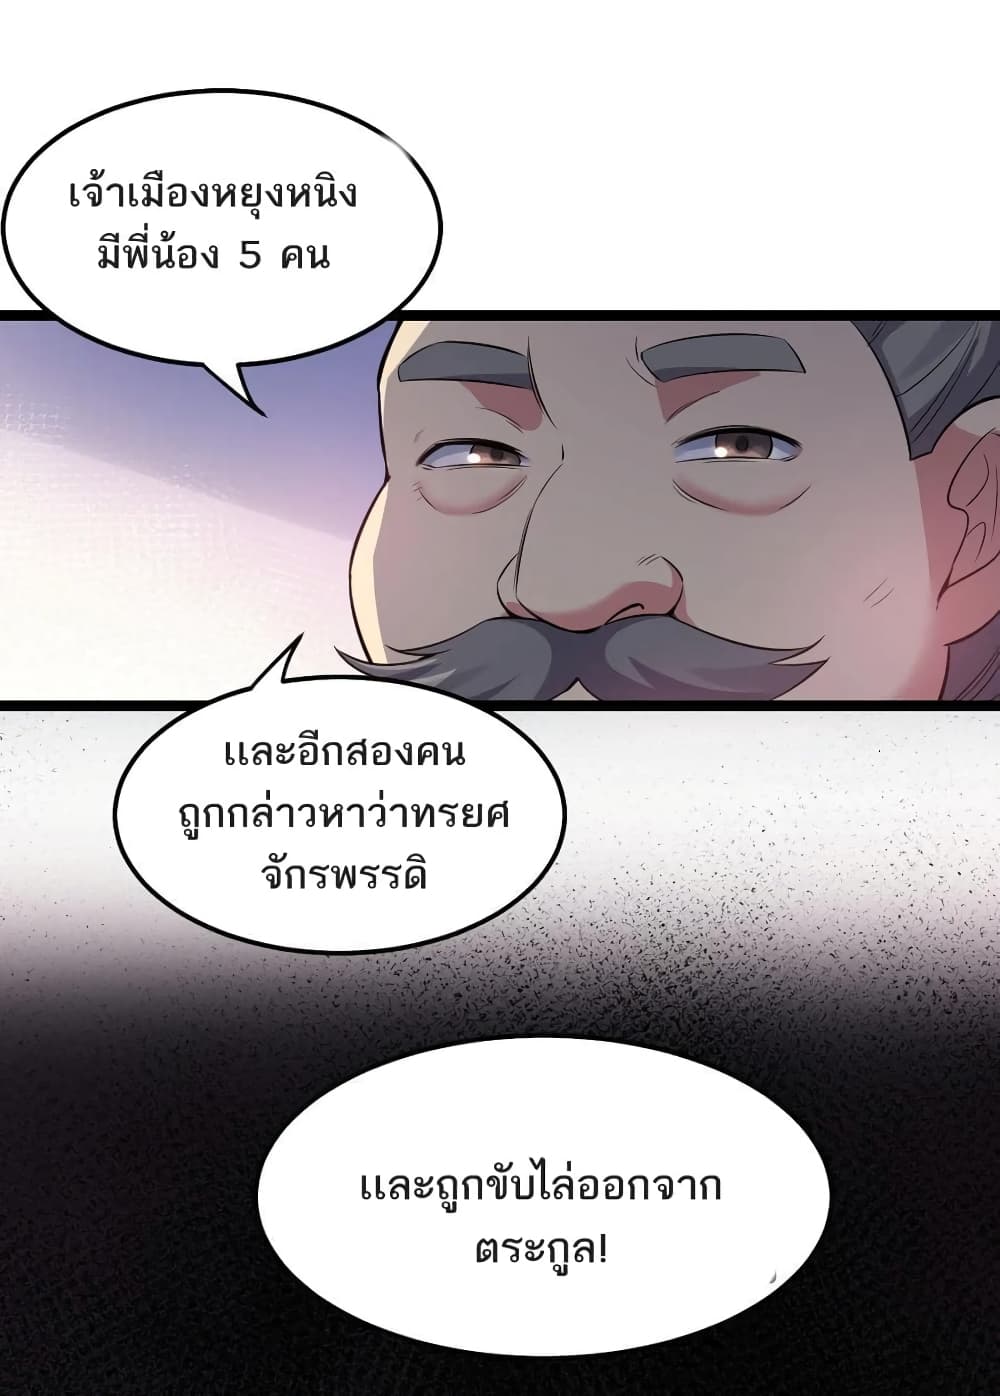 Godsian Masian from Another World ตอนที่ 101 (3)